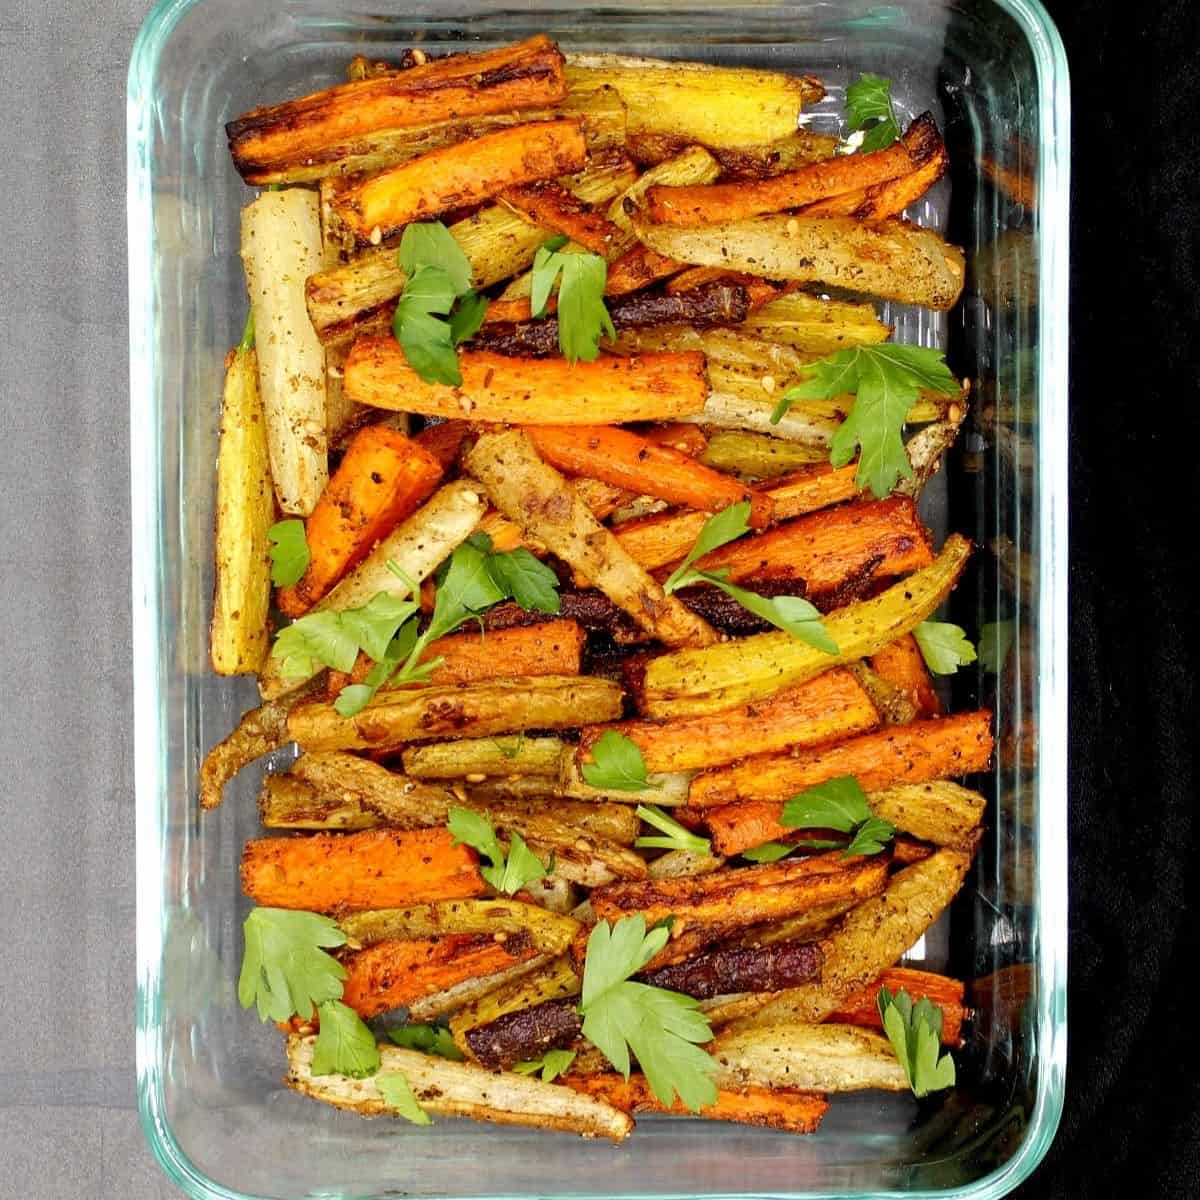 Roasted multicolored carrots in a baking dish